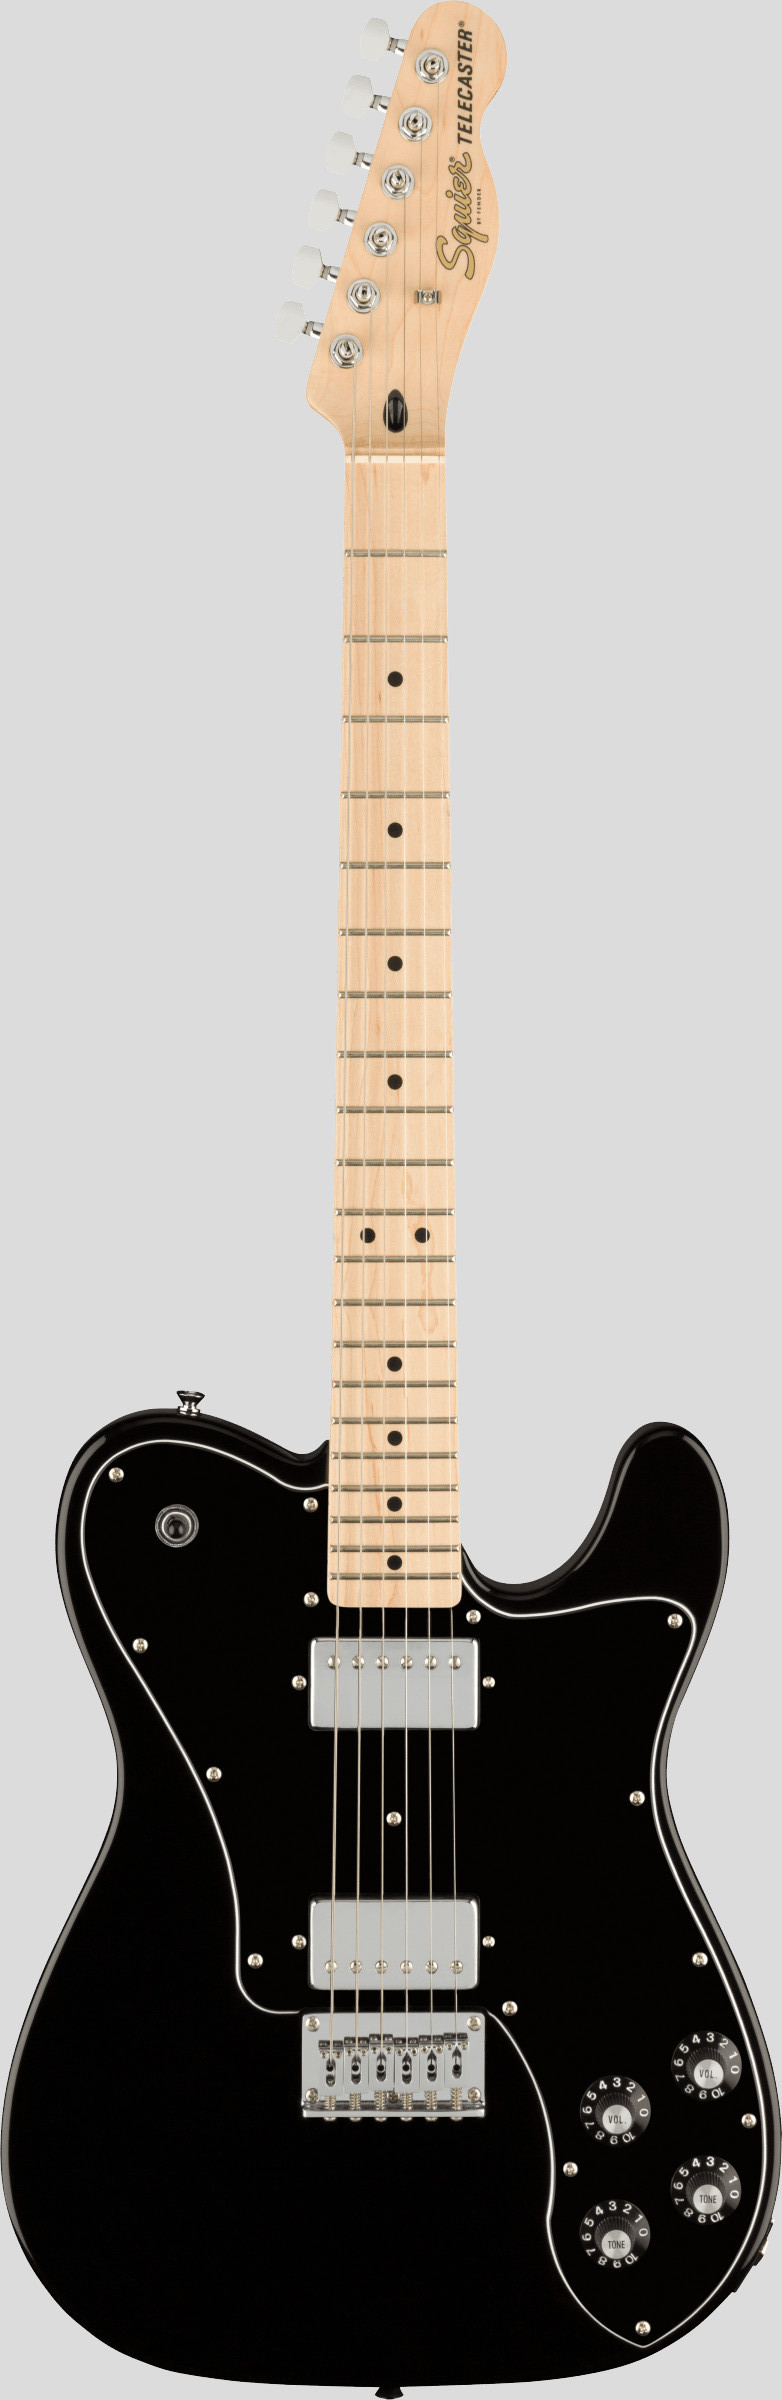 Squier by Fender Affinity Telecaster Deluxe Black 1